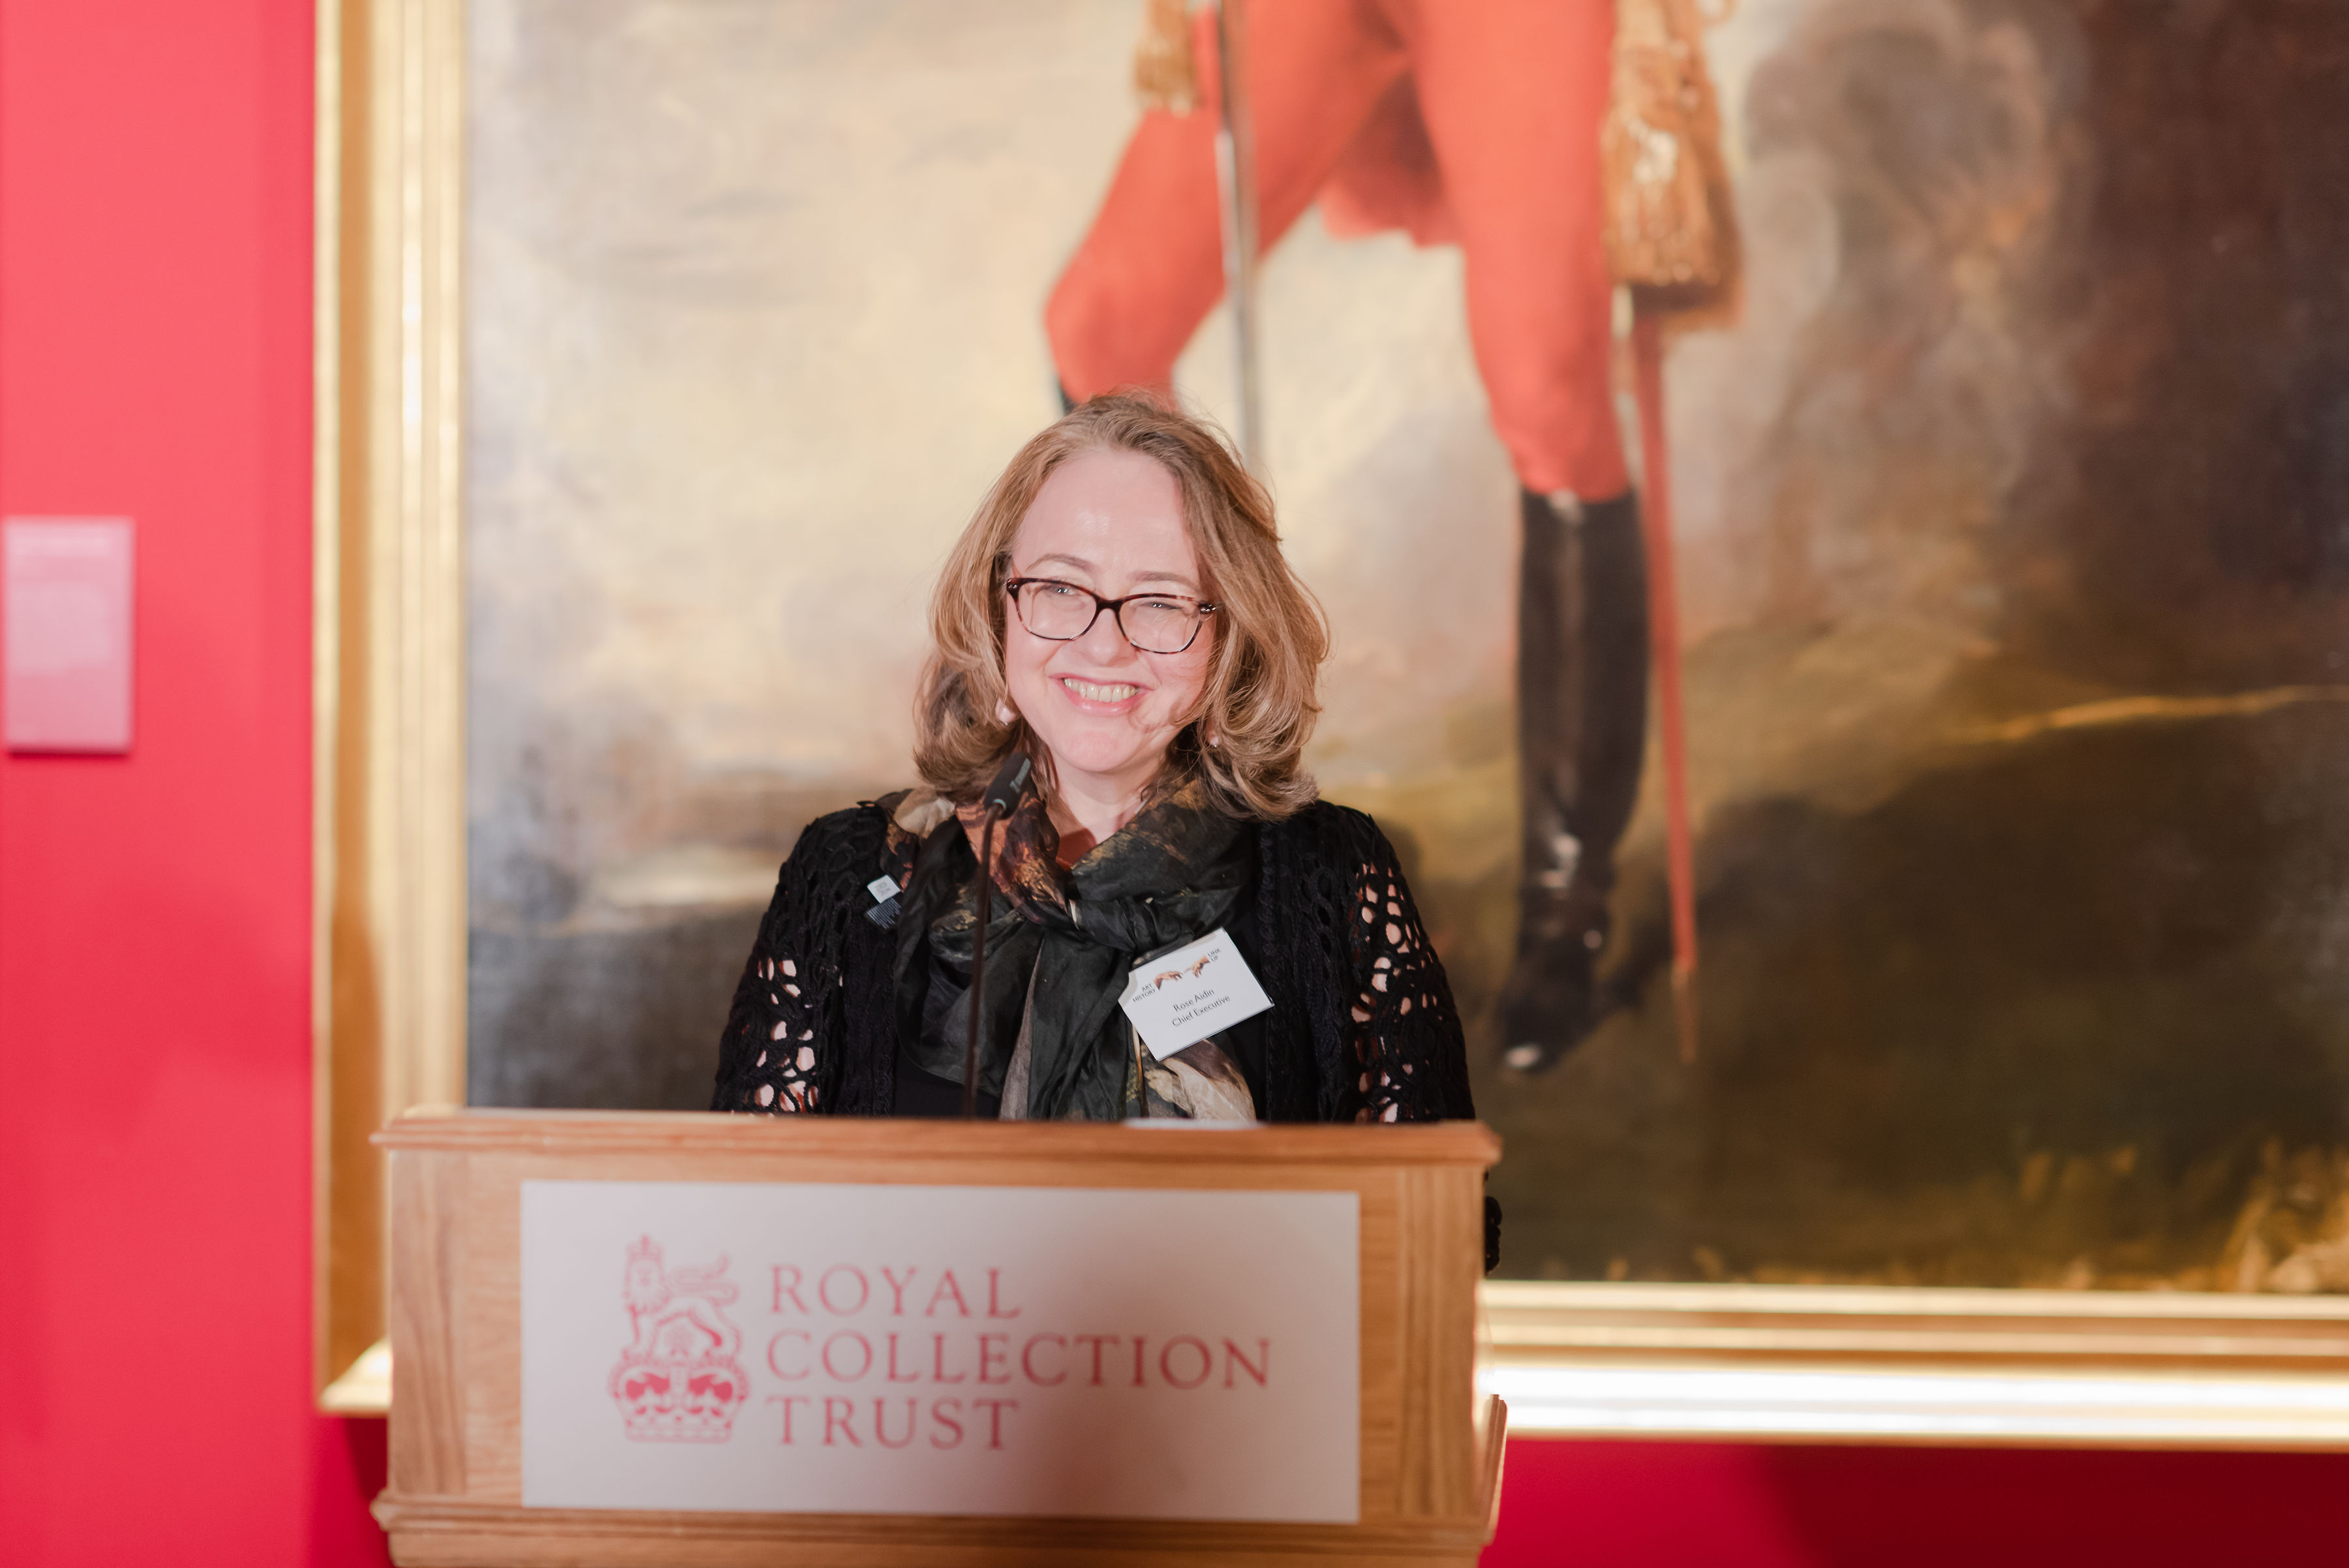 The Wick - Rose Aidin speaking at a student _Soiree at the Palace_ careers networking event hosted by the Royal Collection, December 2019, Flo Brooks